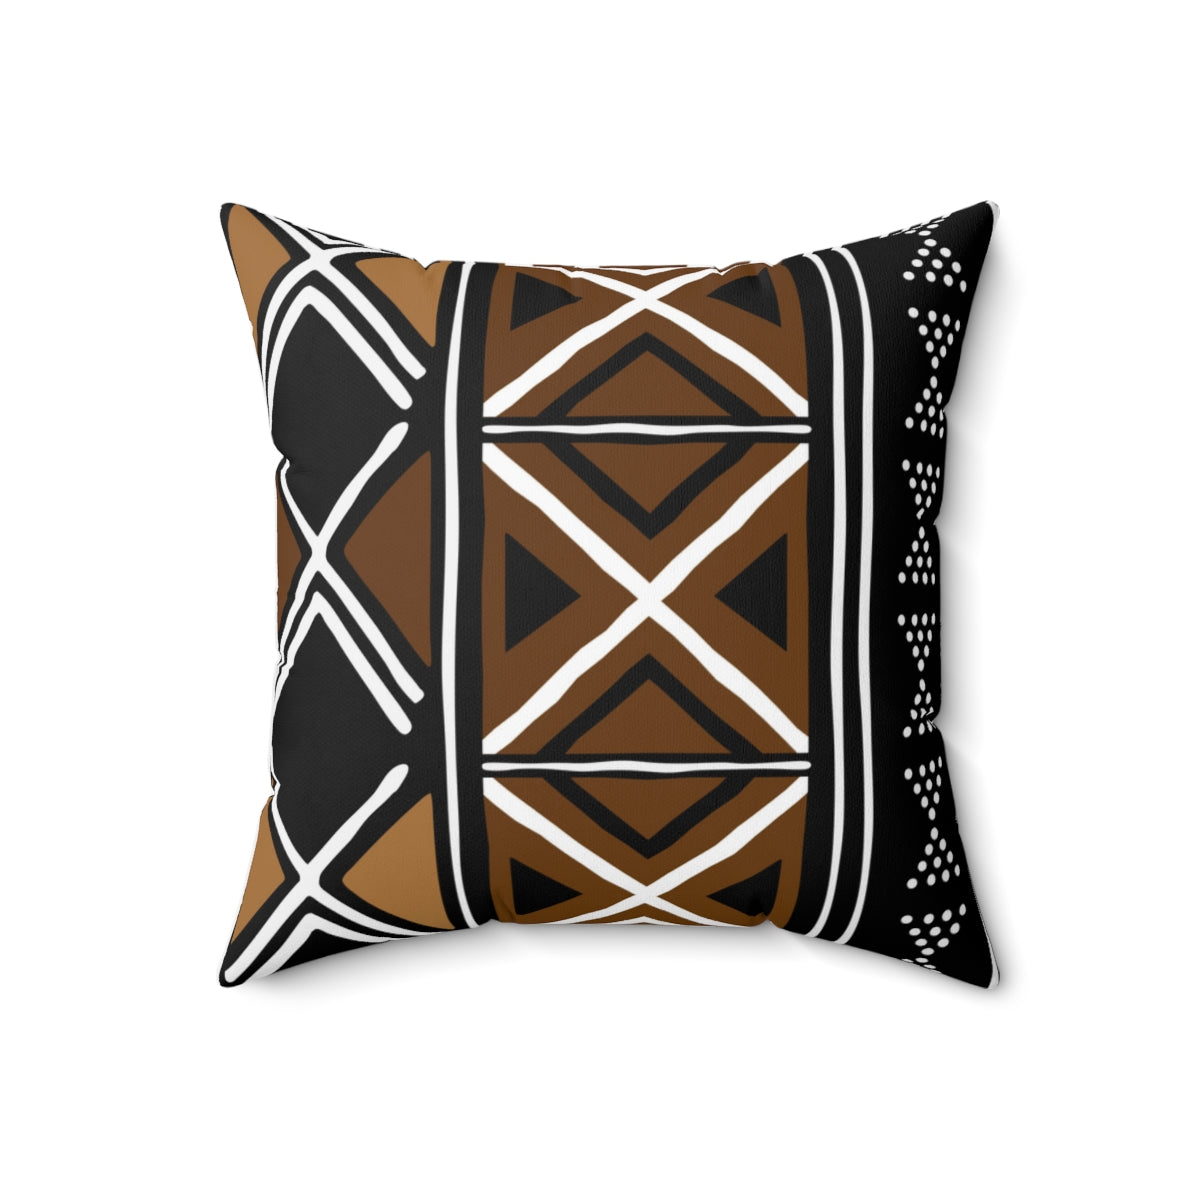 Mudcloth Print Black and Brown Colored Cushion Sleeve